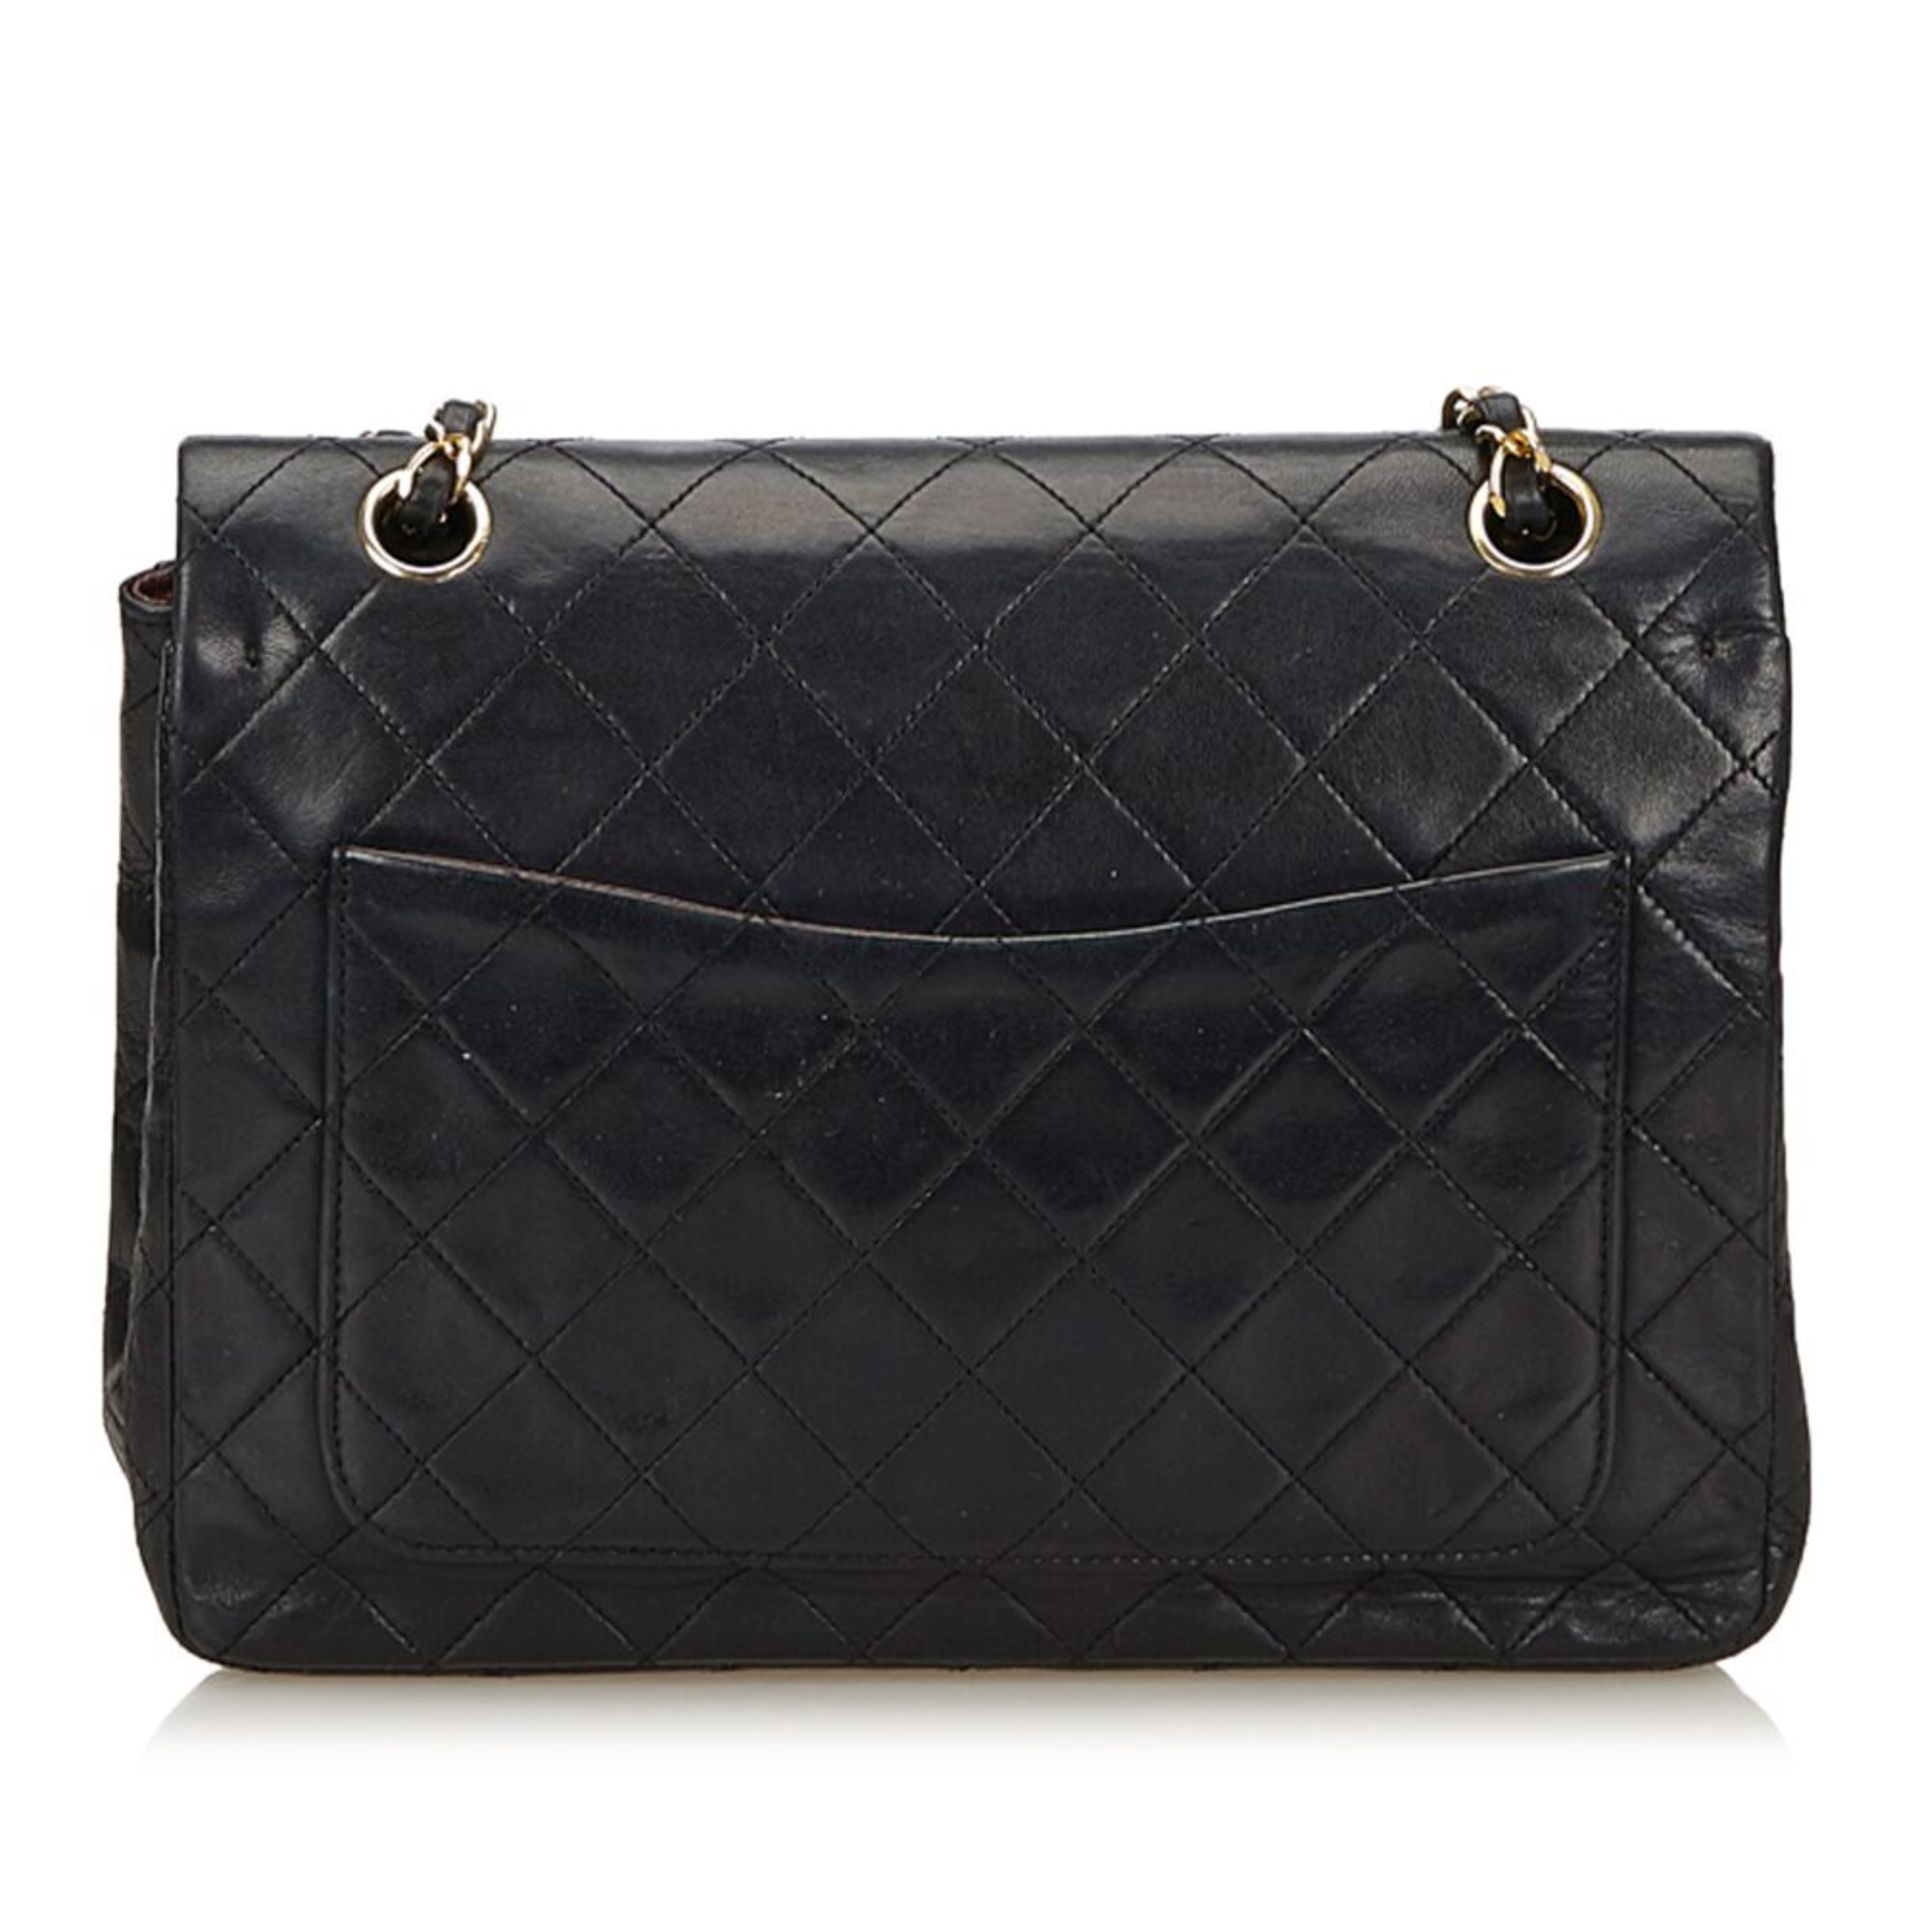 A Chanel classic medium double flap shoulder bag,featuring a quilted leather body, chain shoulder - Image 3 of 6